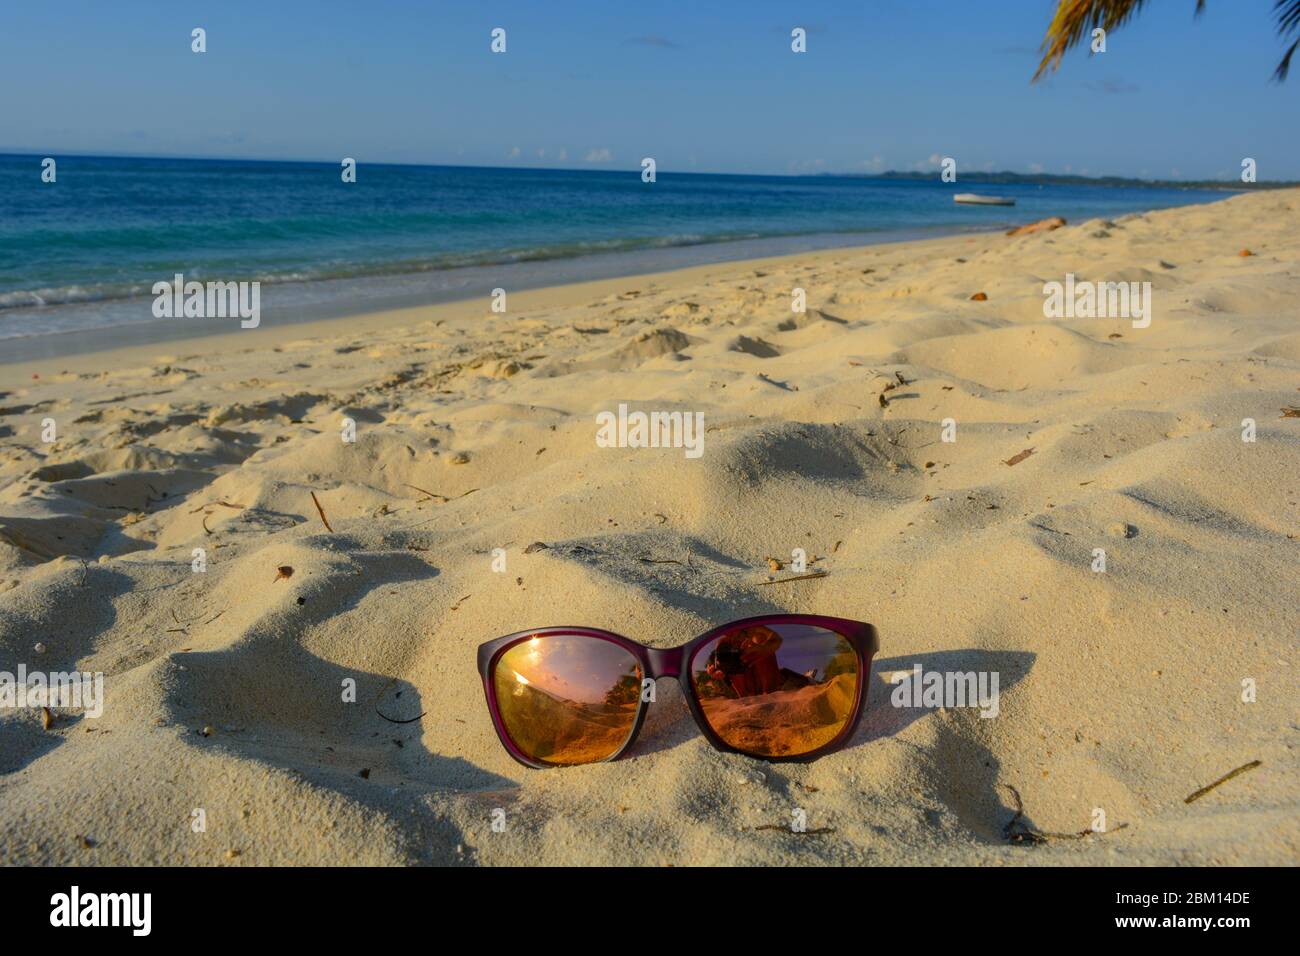 Fantastic tropical holiday scene: a pair of sunglesses on a sunny beach, over fine golden sand, in the back crystal clear blue ocean and clean horizon Stock Photo